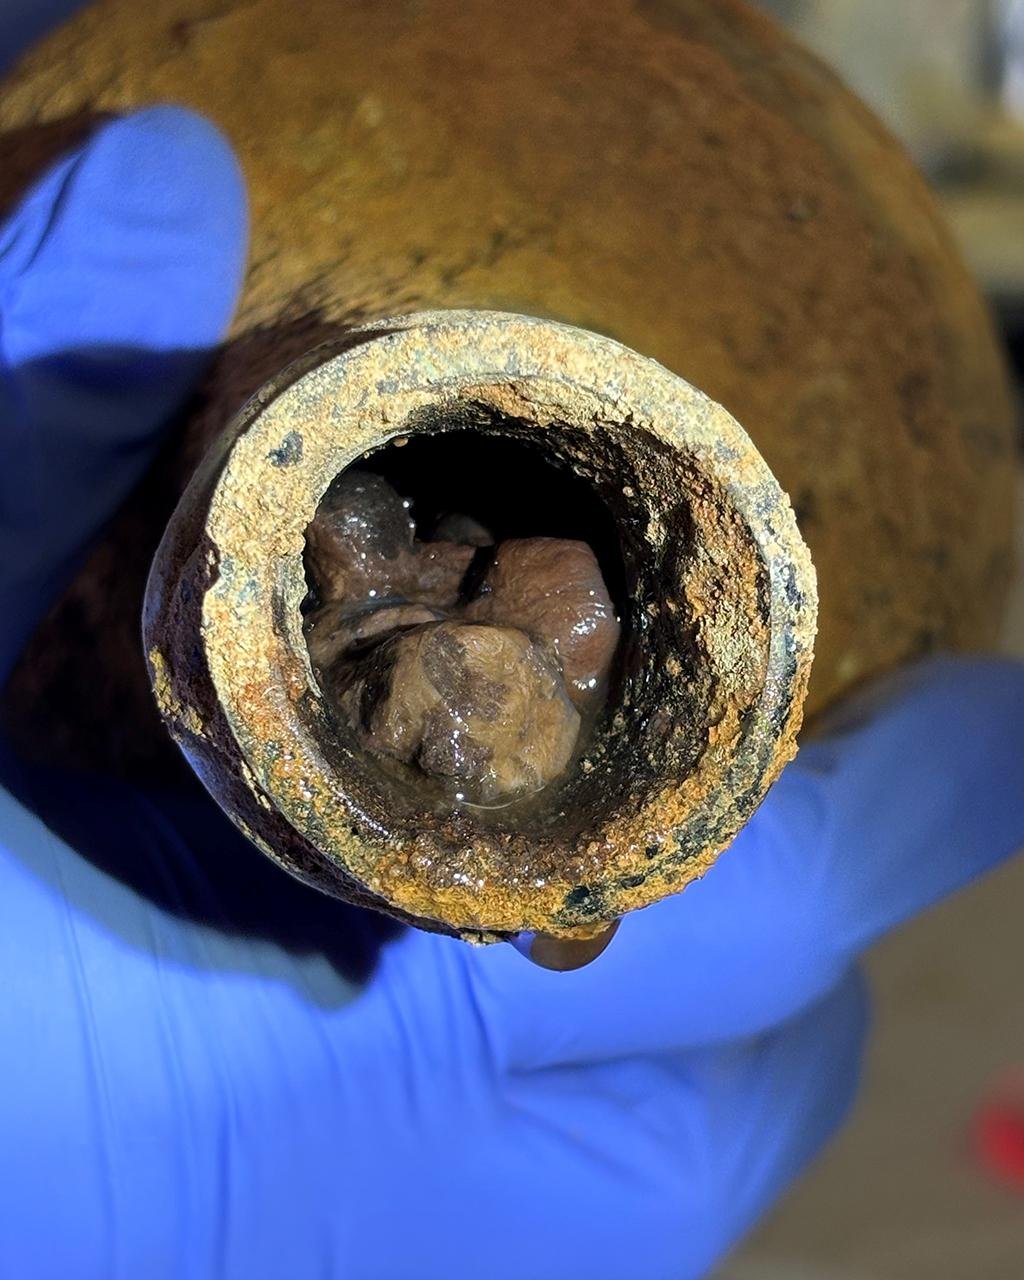 35 glass bottles of fruit from the 18th century discovered at George Washington’s Mount Vernon